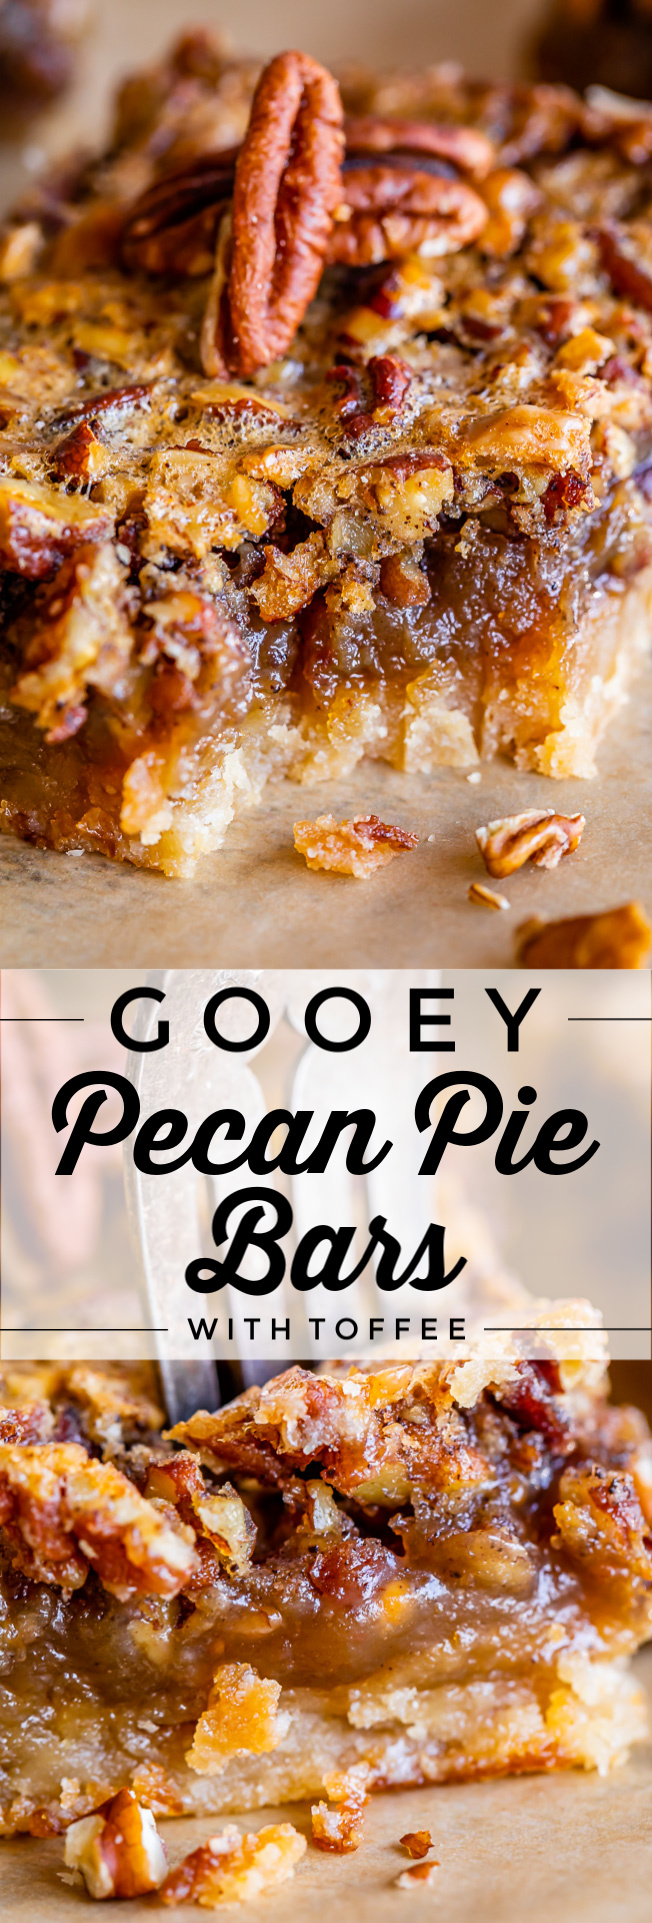 Gooey Pecan Pie Bars with Toffee from The Food Charlatan -   18 desserts Easy recipes ideas